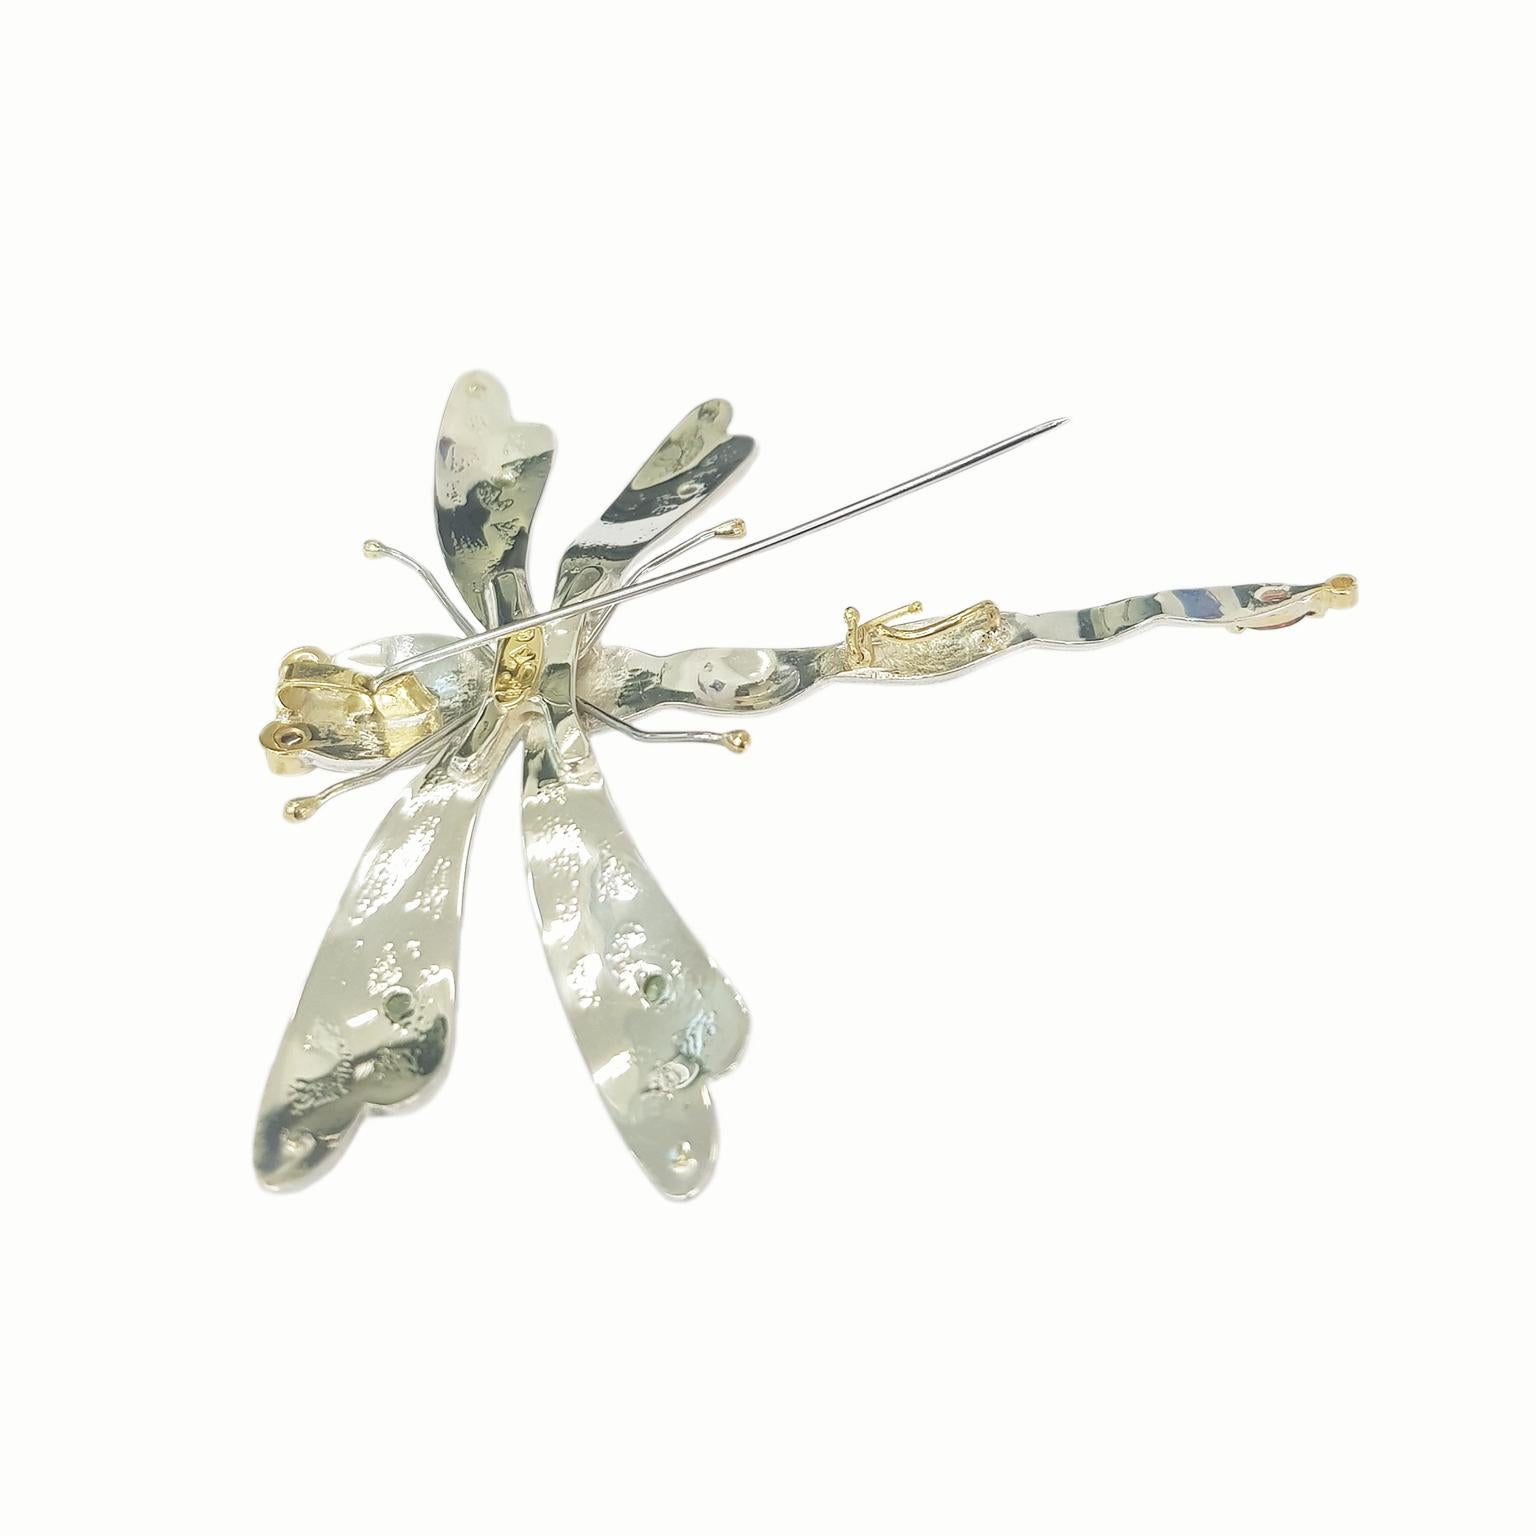 Artisan Paul Amey Dragonfly Pendant-Brooch in Sterling Silver with Diamonds and Garnets For Sale